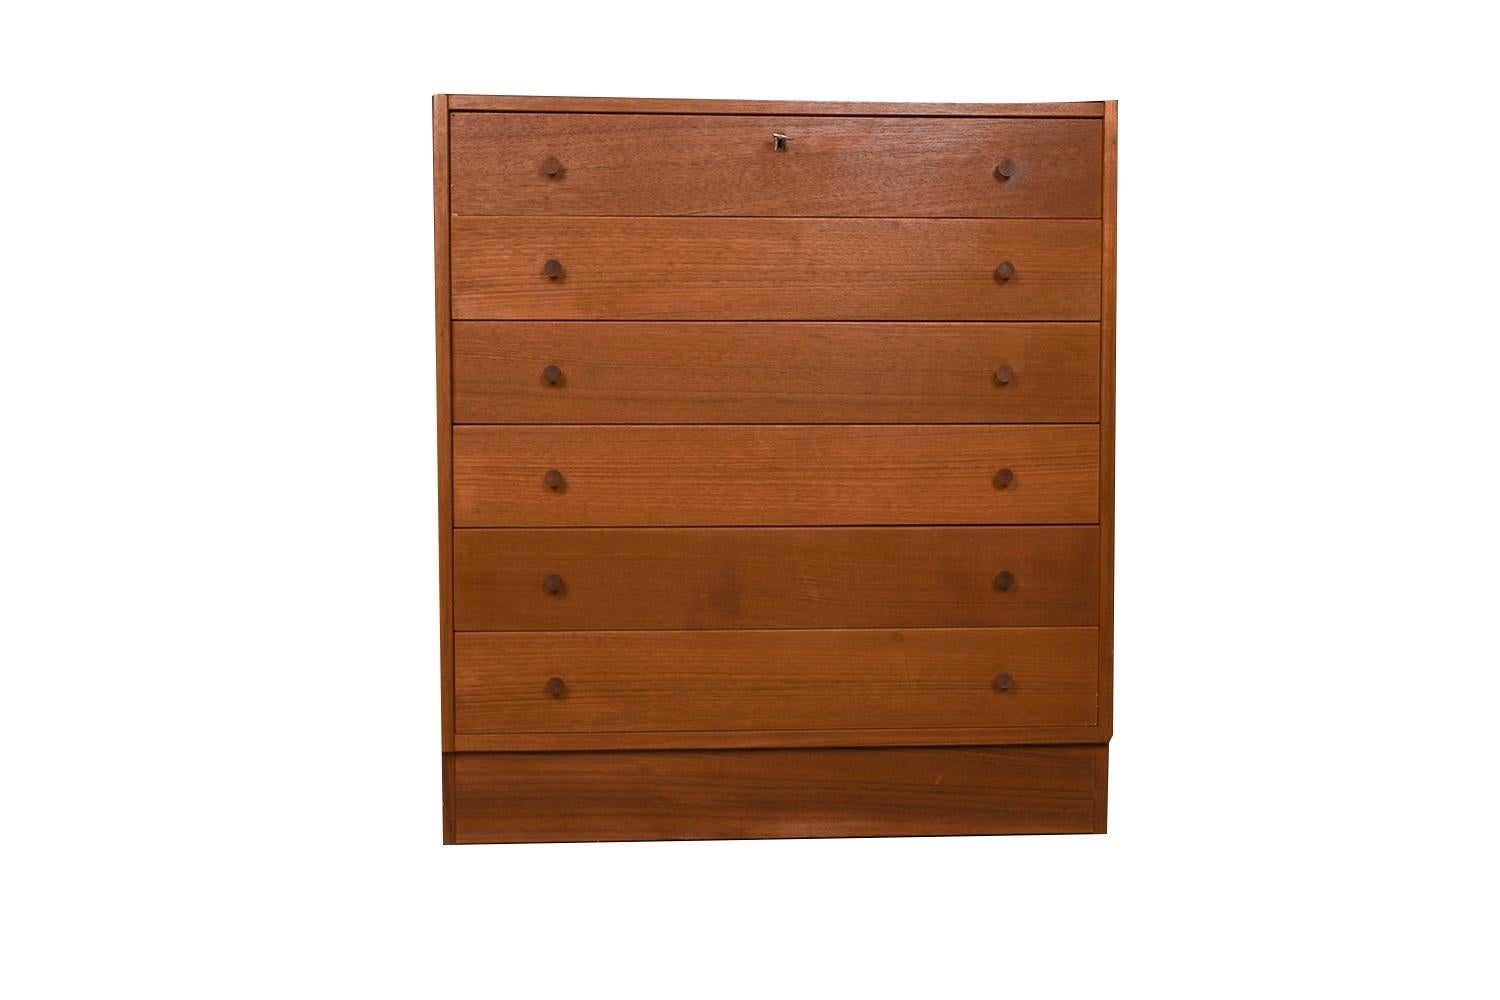 Mid-century modern teak tall dresser, chest of drawers, made in Denmark. Minimalist Danish Modern inspired profile and extremely well-made dresser, has incredible lines and detailing. Stunning teak grain tall dresser accented with sculpted teak